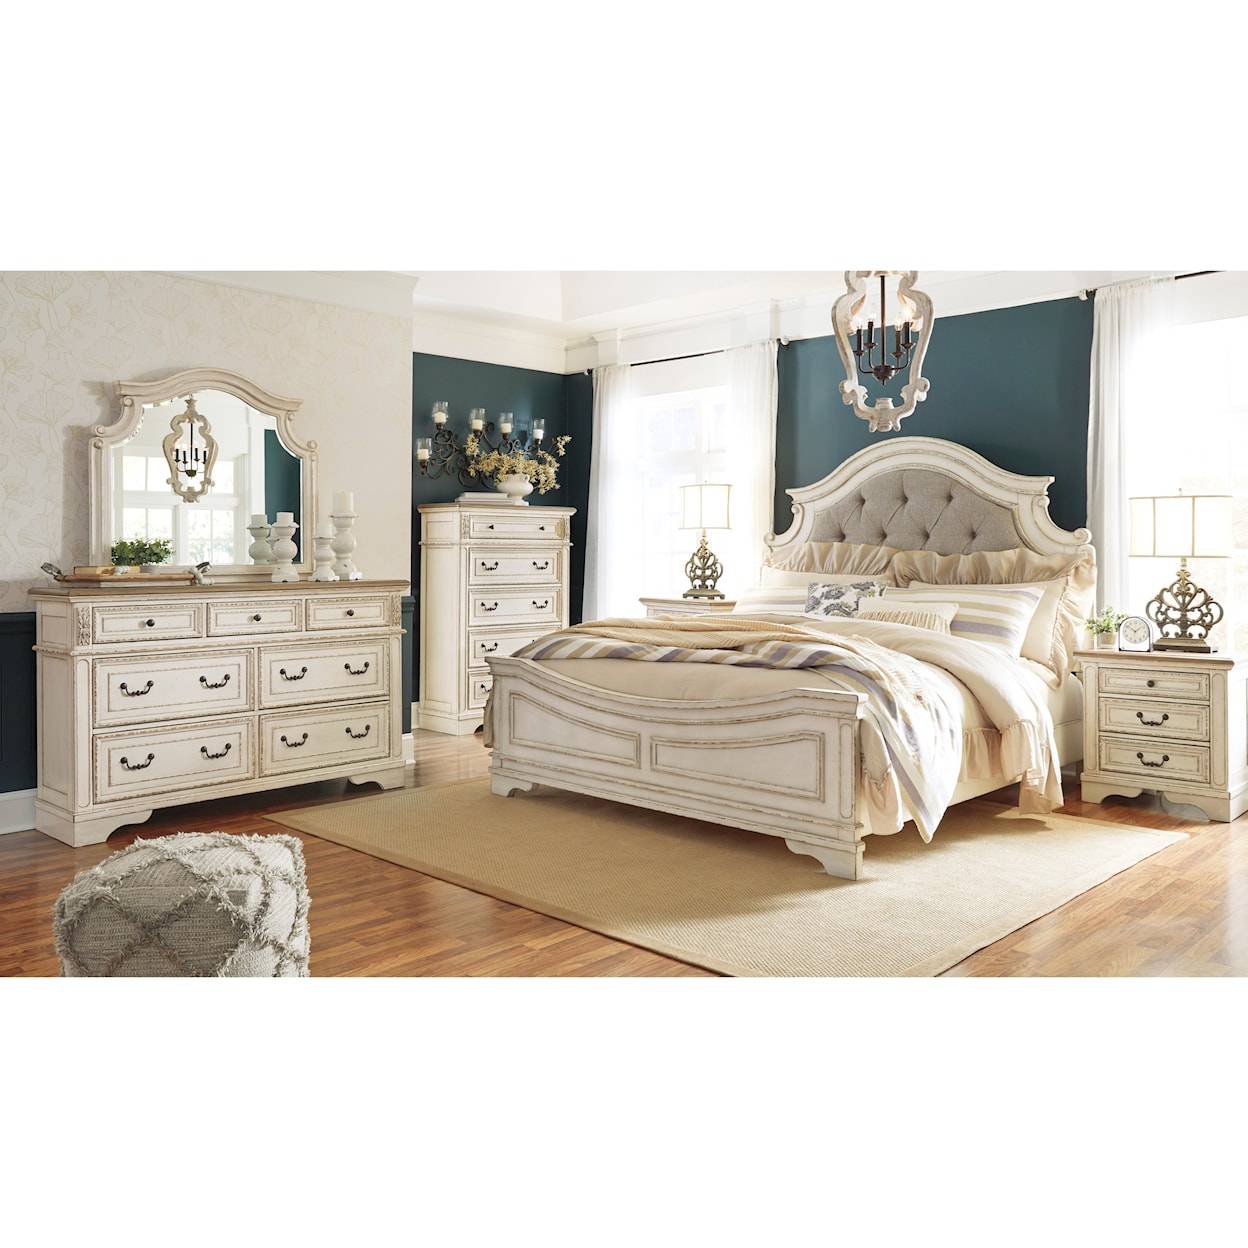 Signature Design by Ashley Realyn 7PC Queen Bedroom Group